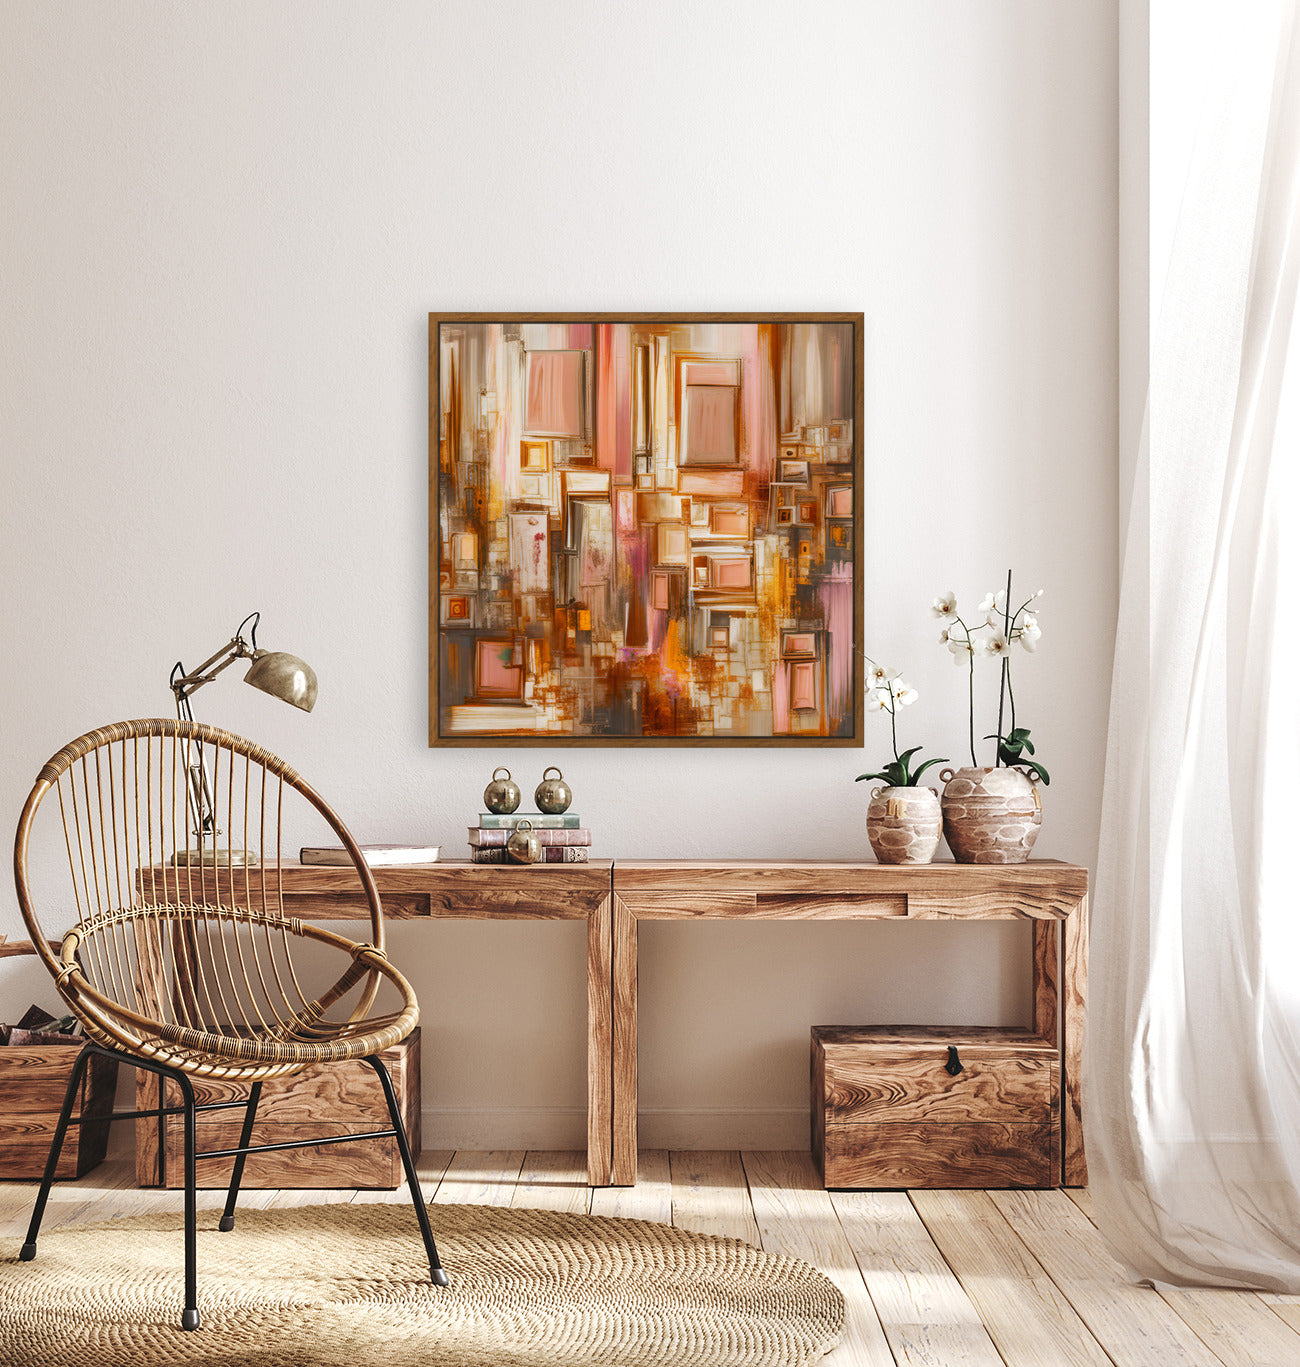 Ready to Bring Your Walls to Life? Get a FREE Mockup Today